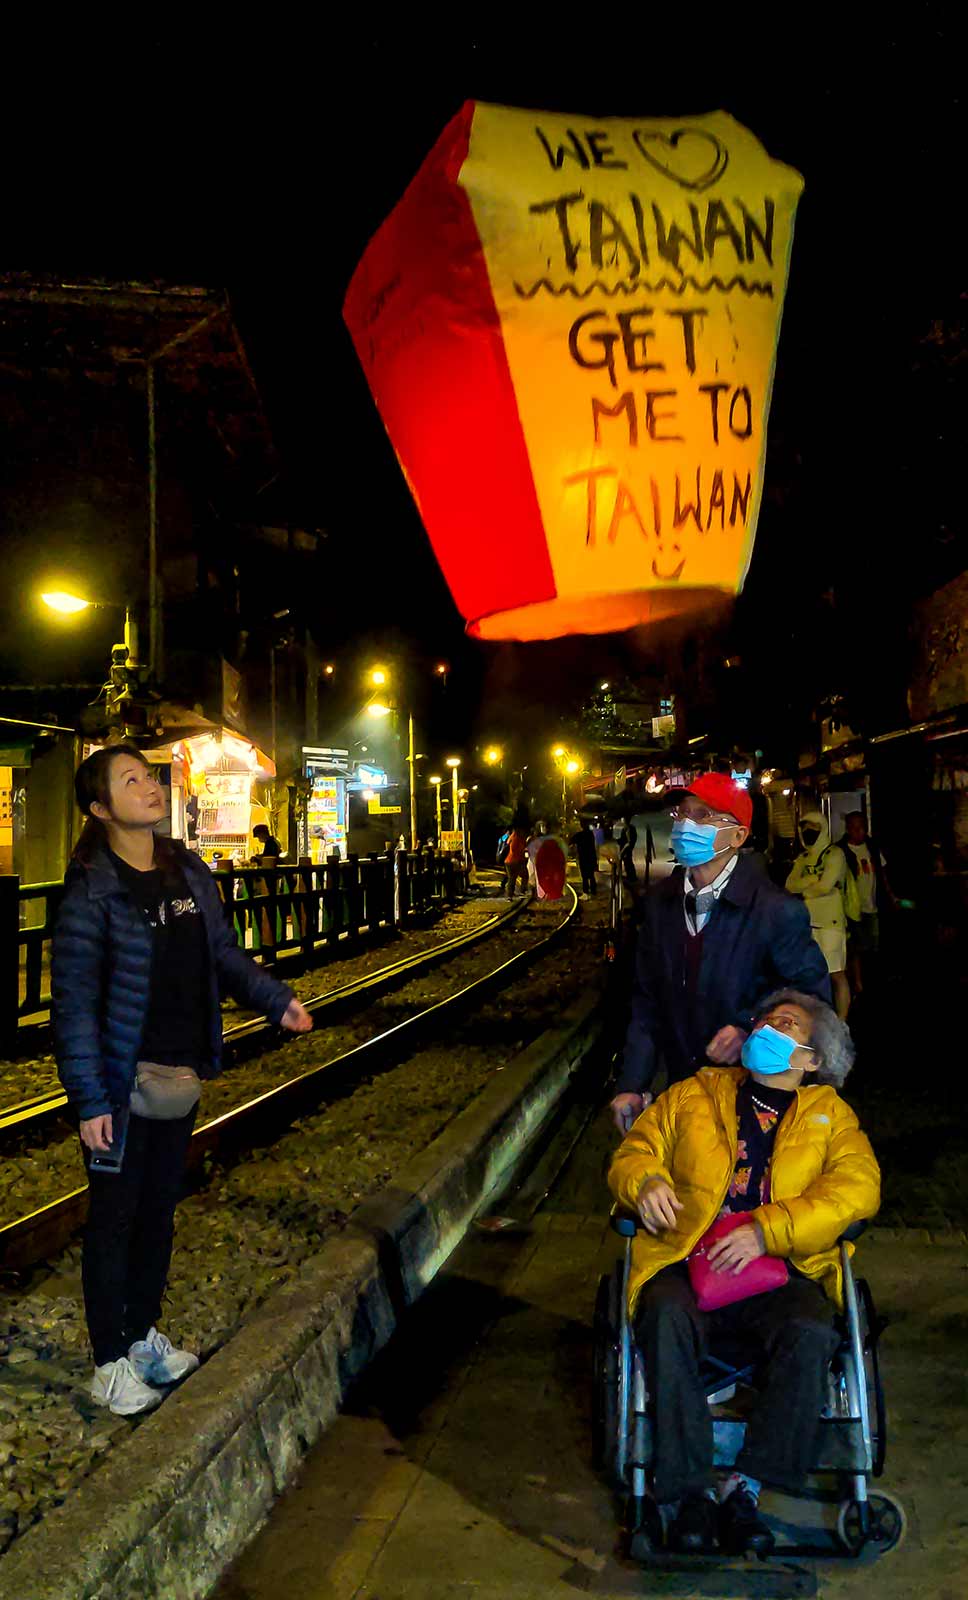 A family launches a sky lantern into the air at night.